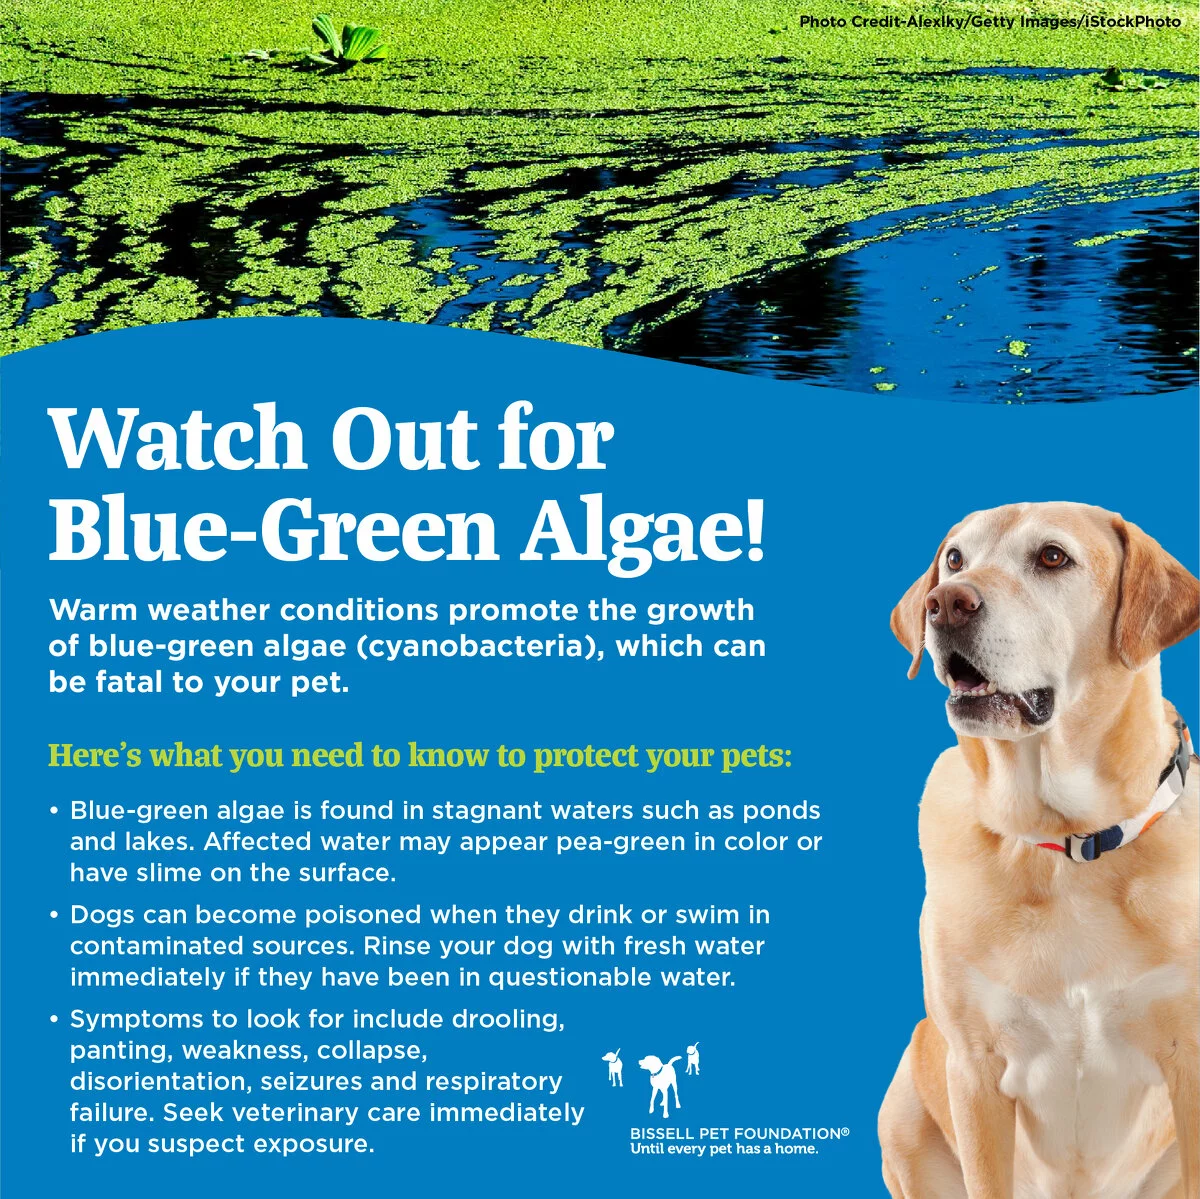 graphic with tips to protect pet from blue-green algae